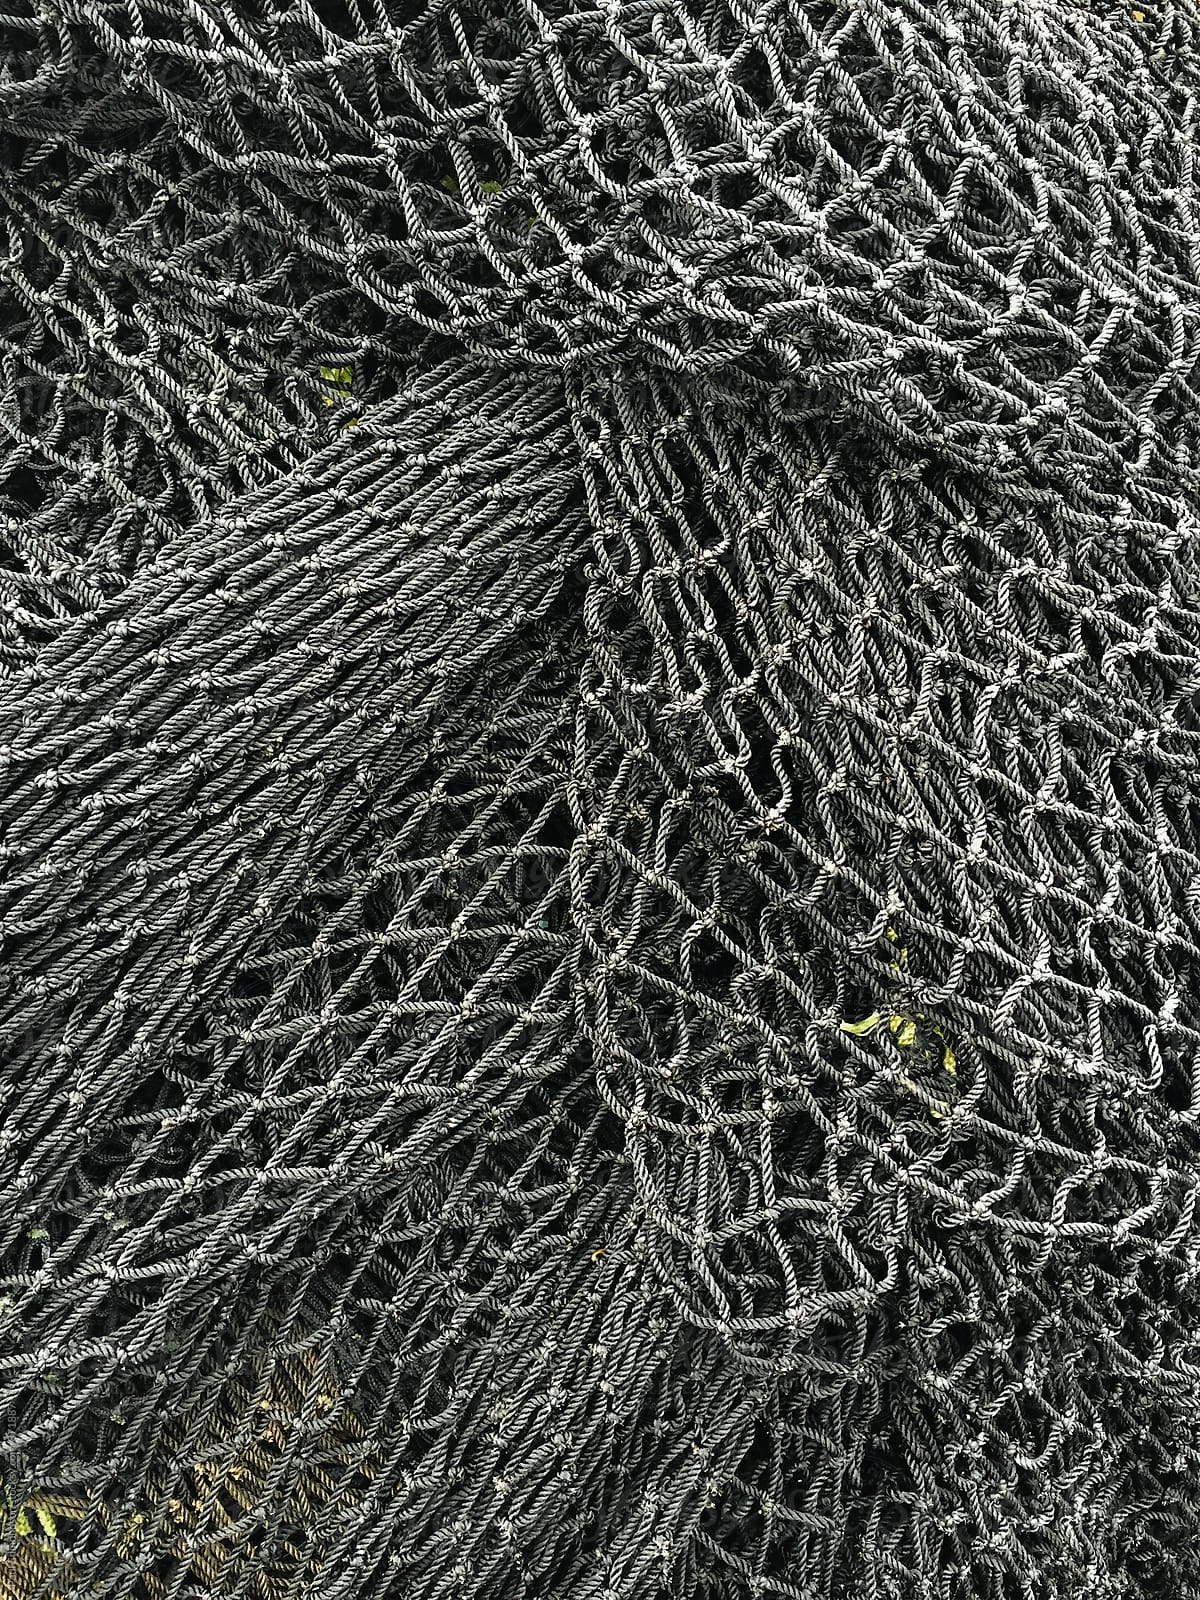 Close up of piles of commercial fishing nets